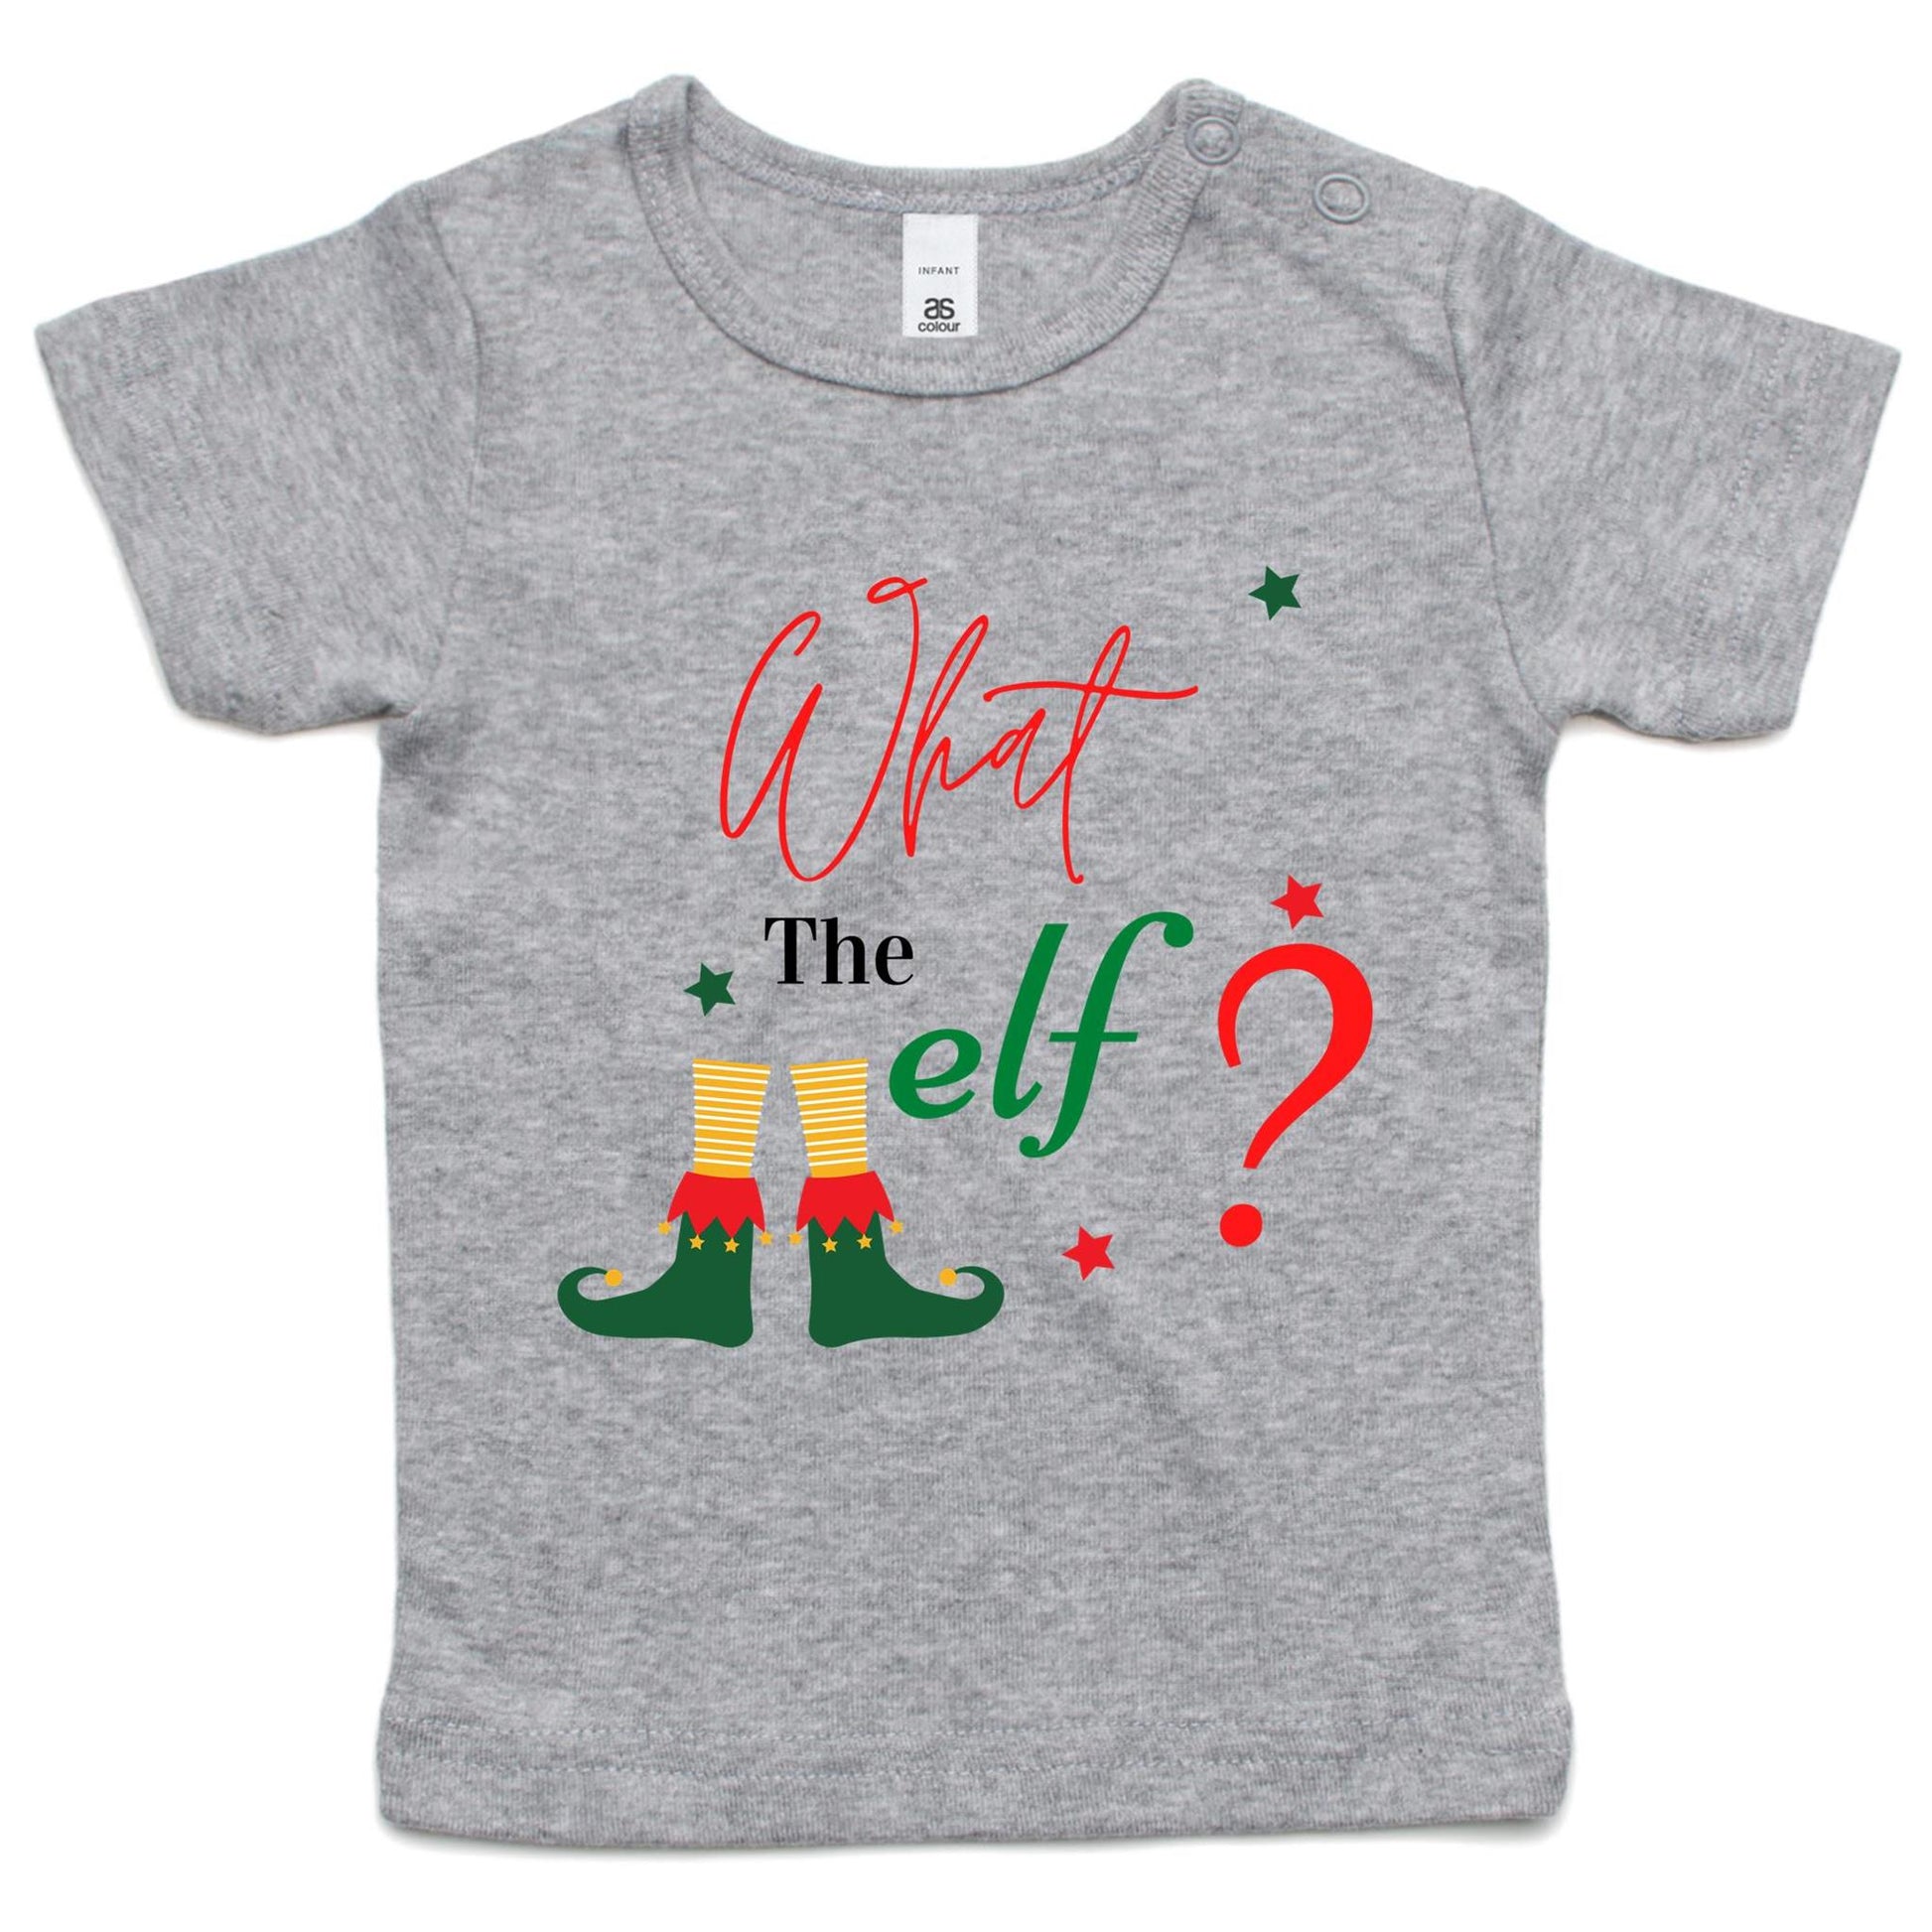 What The Elf? - Baby T-shirt Grey Marle Christmas Baby T-shirt Merry Christmas